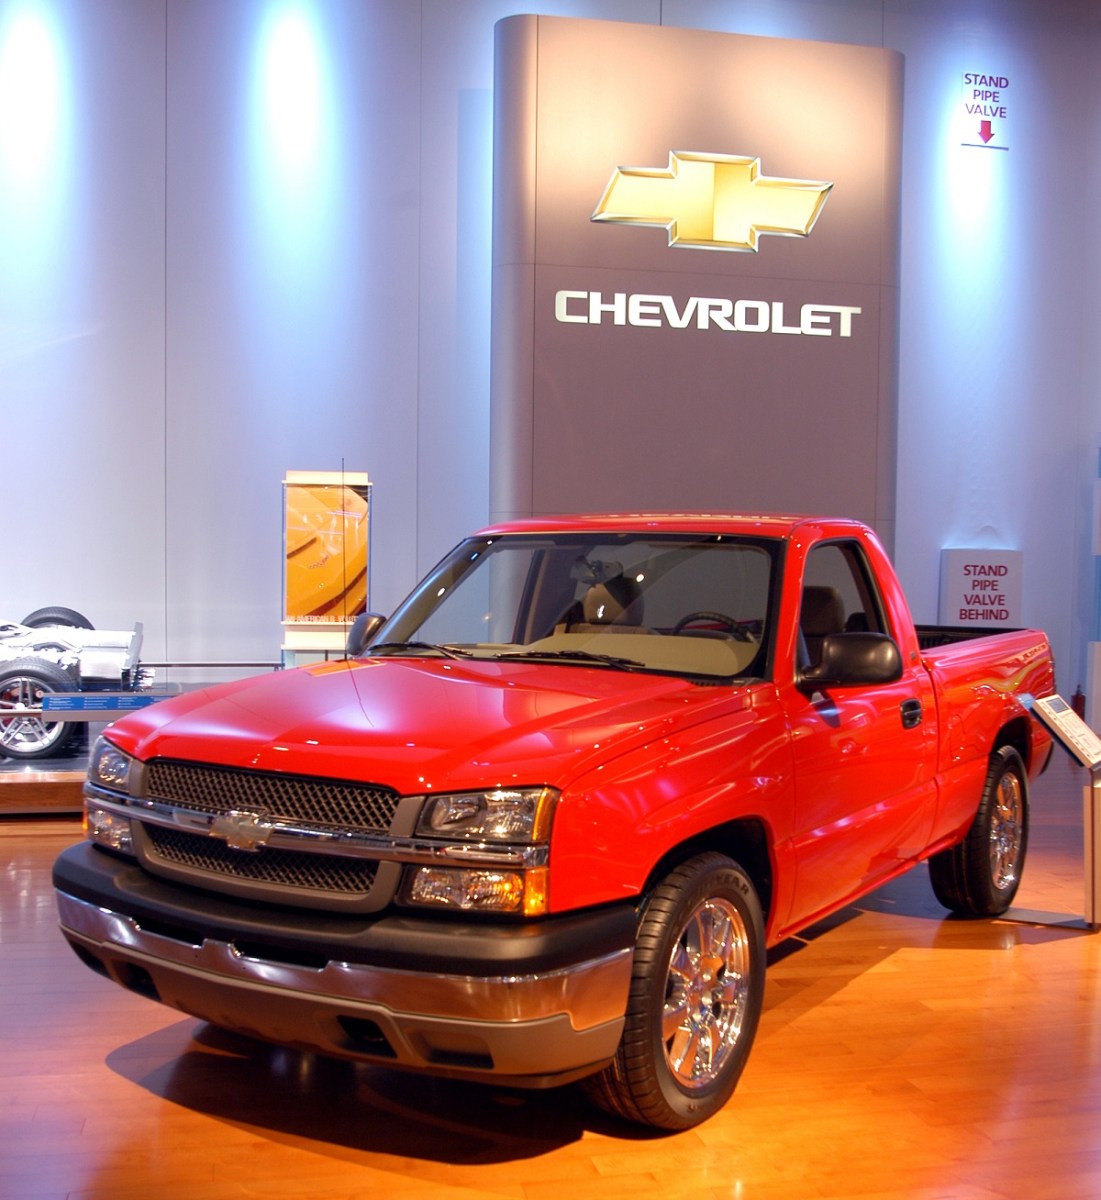 2005 Chevy Silverado in red at an auto show